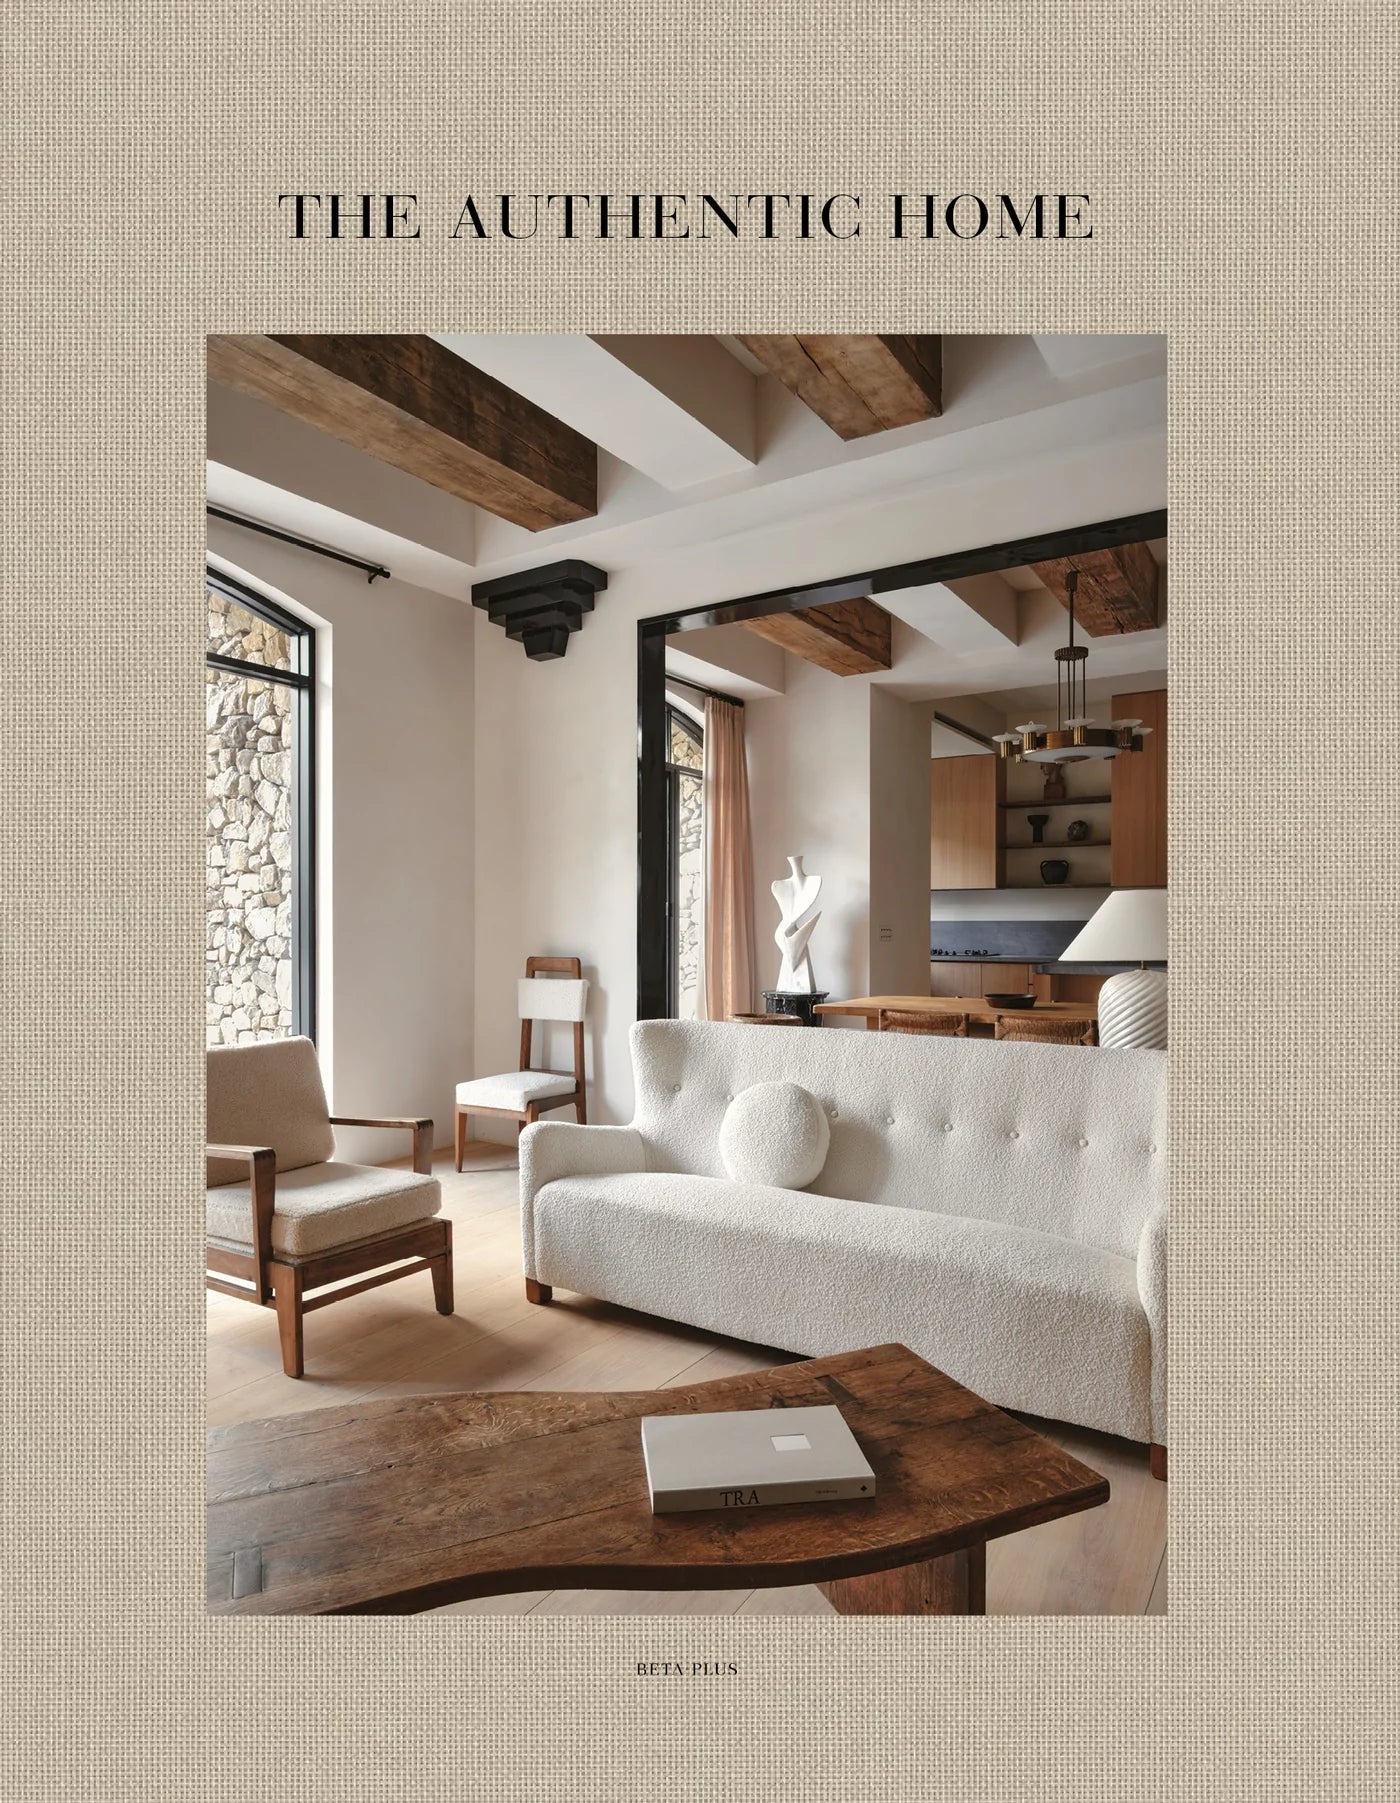 THE AUTHENTIC HOME